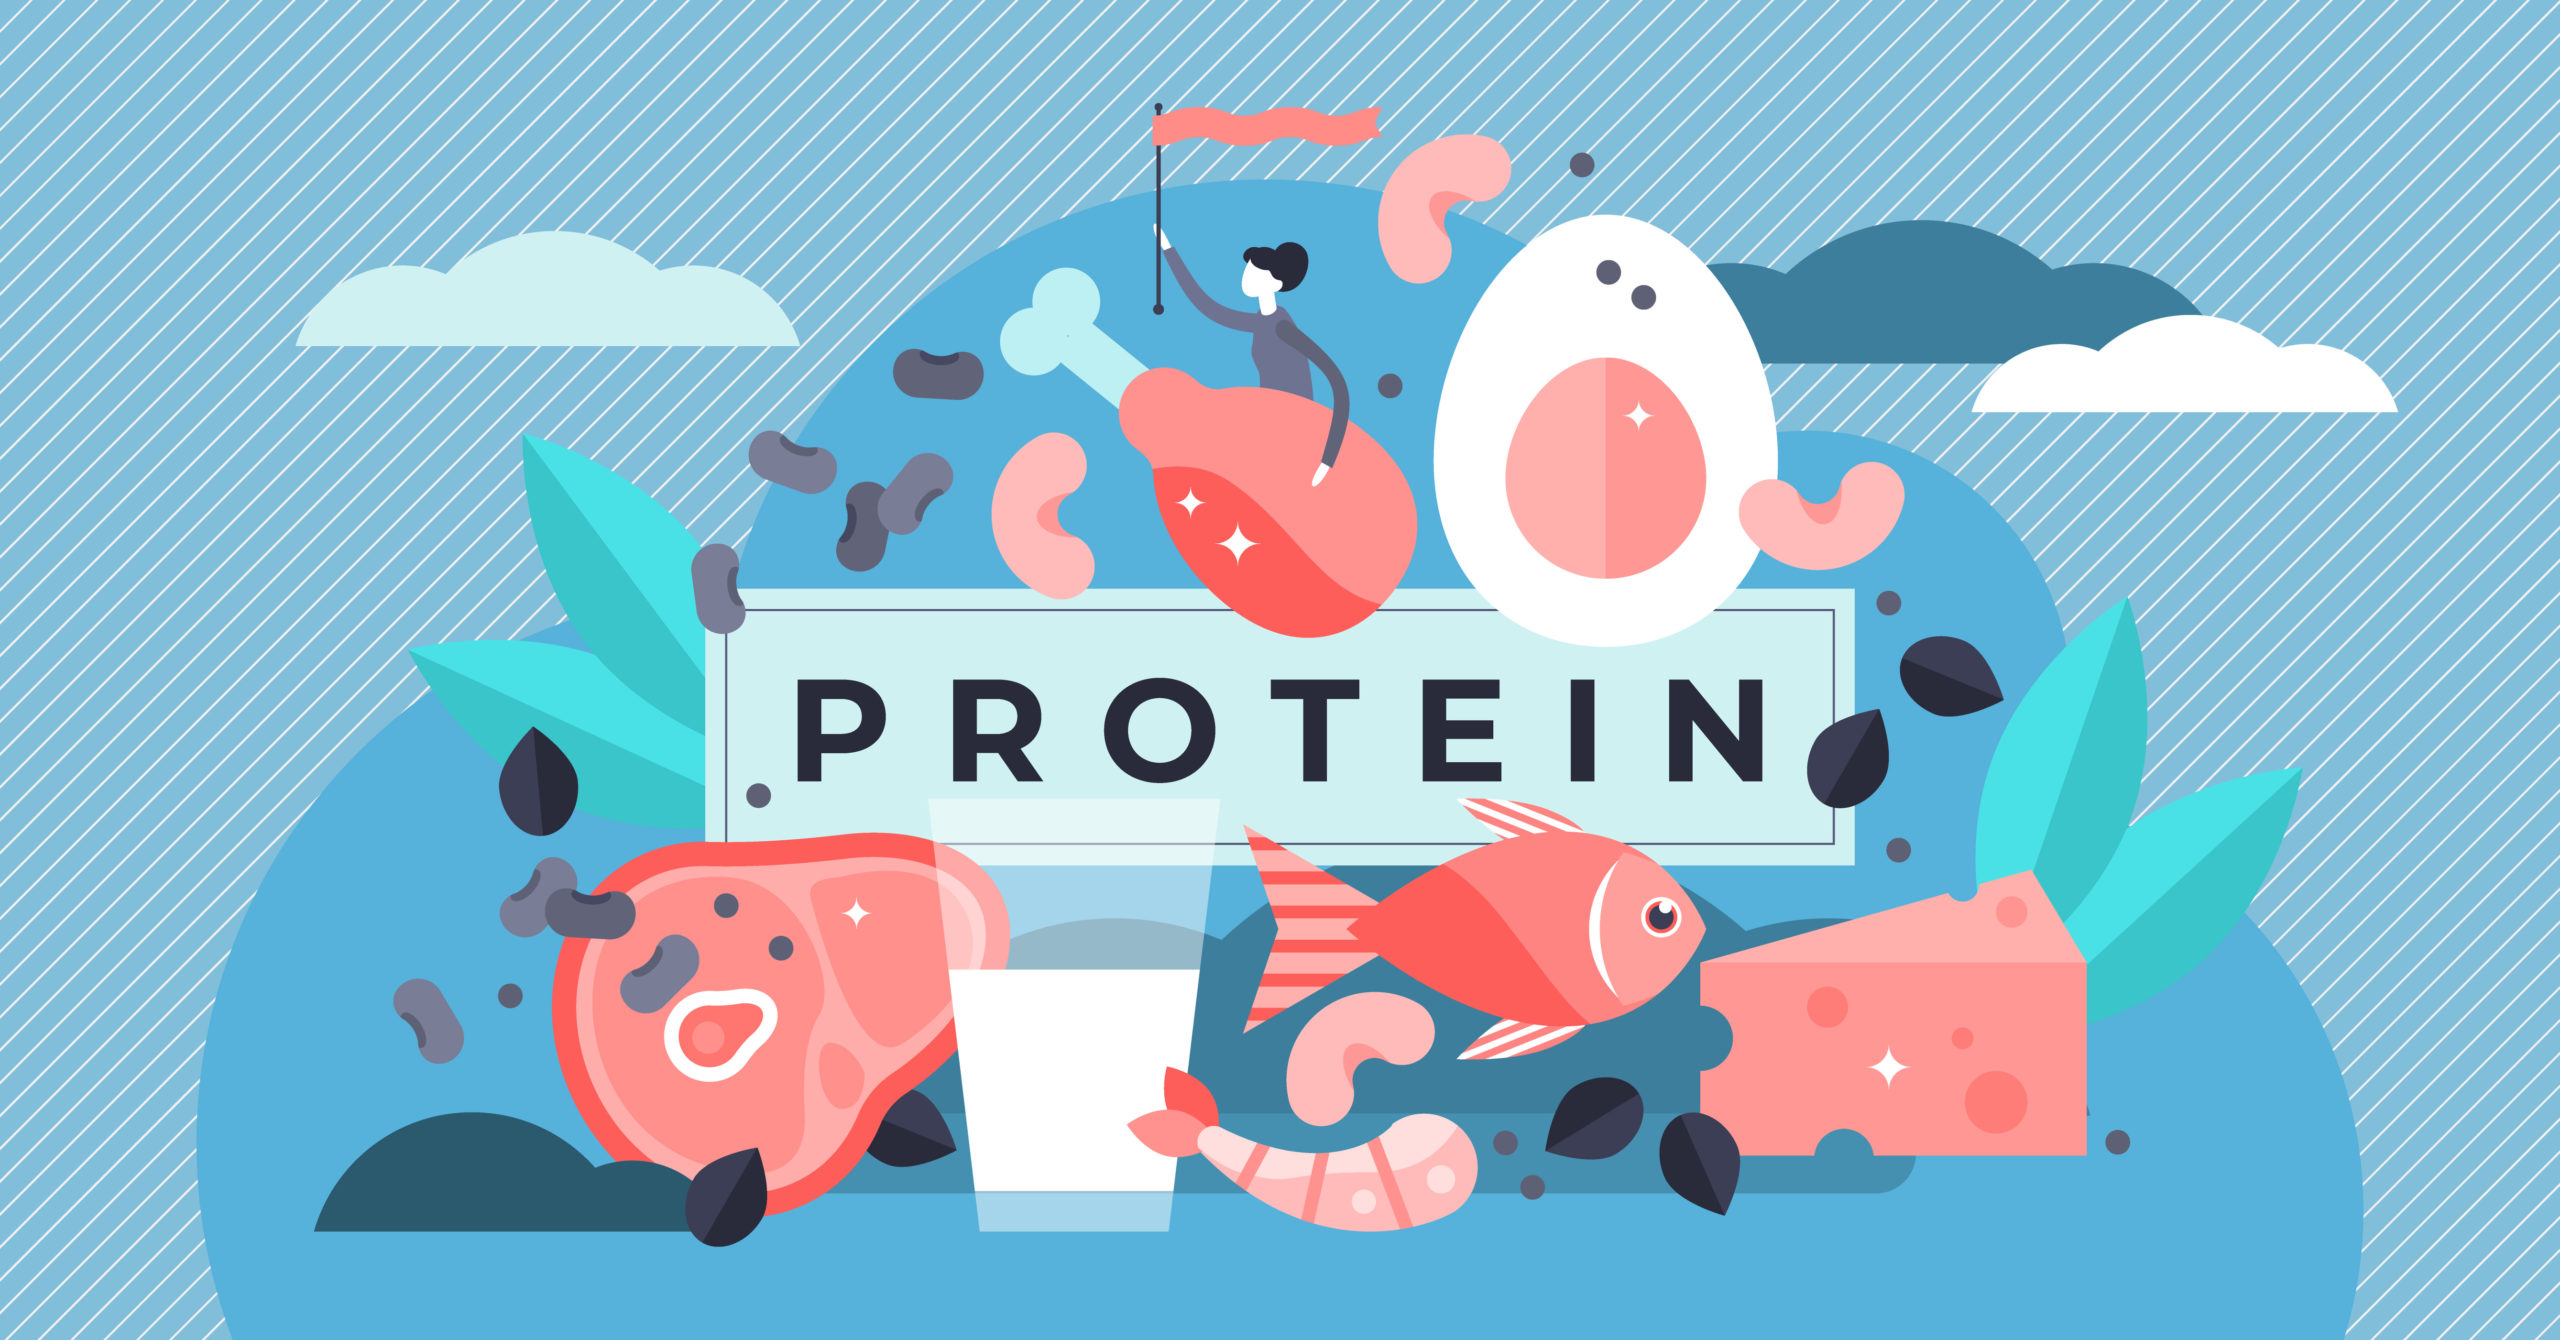 Protein vector illustration. Flat tiny amino acid food menu persons concept. Biomolecules and macromolecules for healthy and athletic lifestyle. Nutrition and wholesome products for cooking and eating